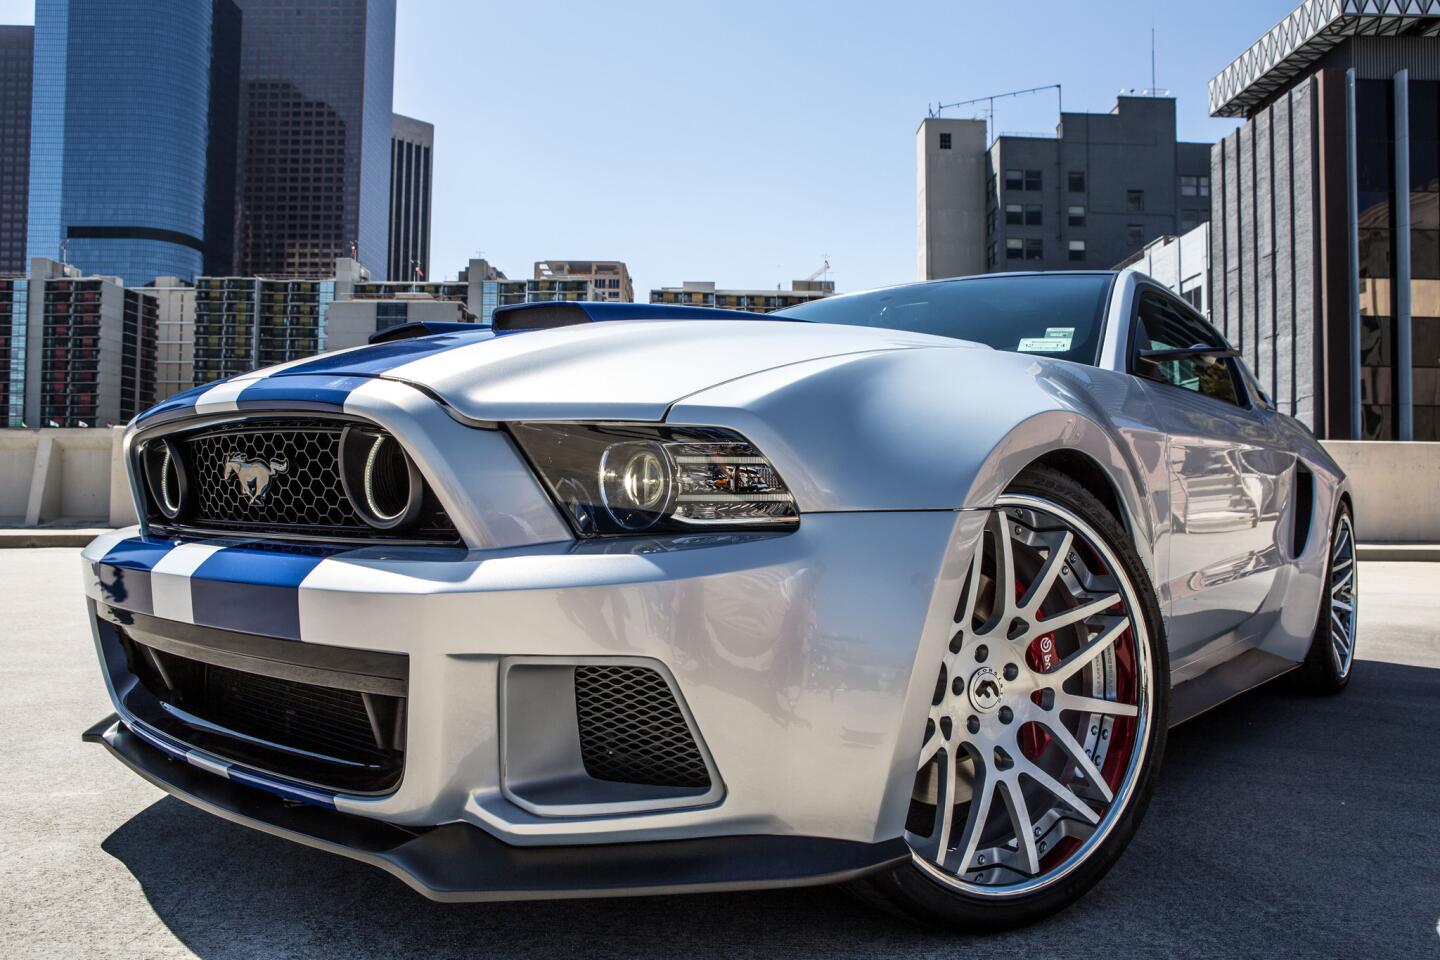 2015 Ford Mustang Confirmed For Need For Speed Movie: Video